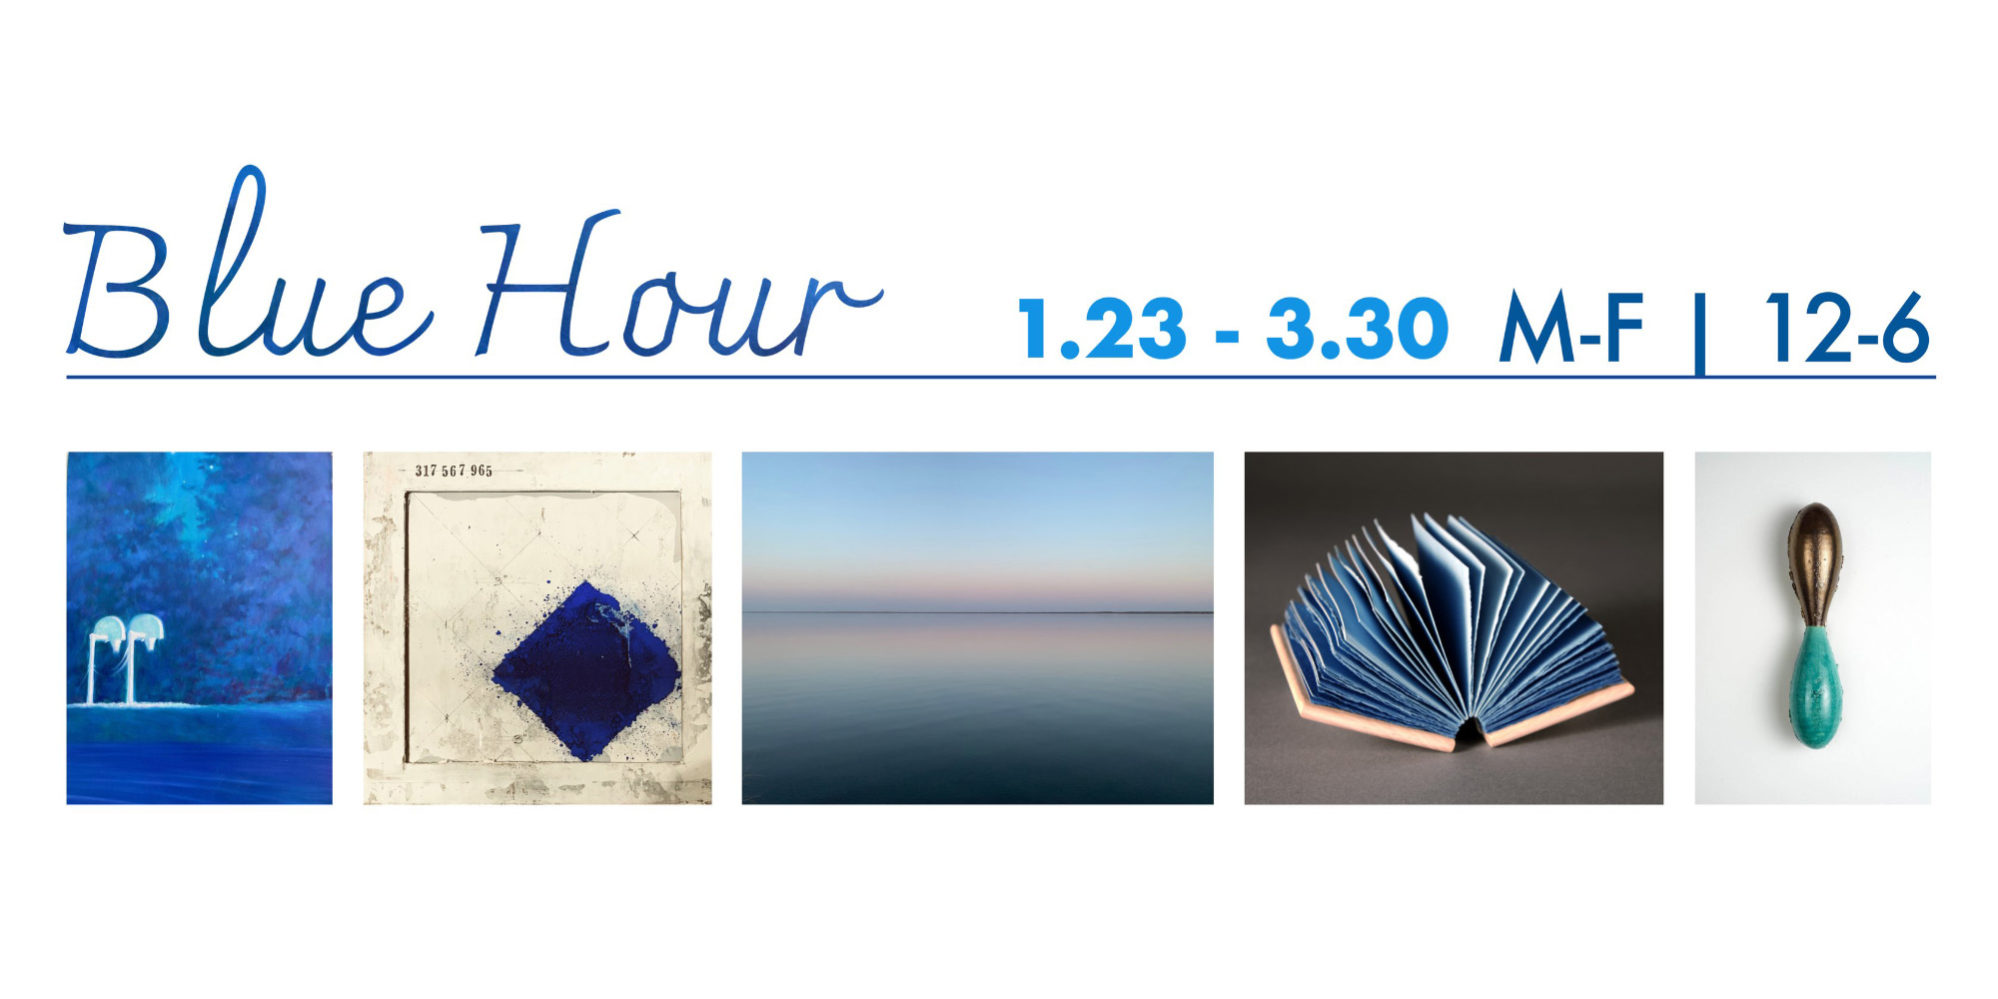 Blue Hour, an art exhibition at Intersect Arts Center in Gravois Park from January 23rd to March 30th.